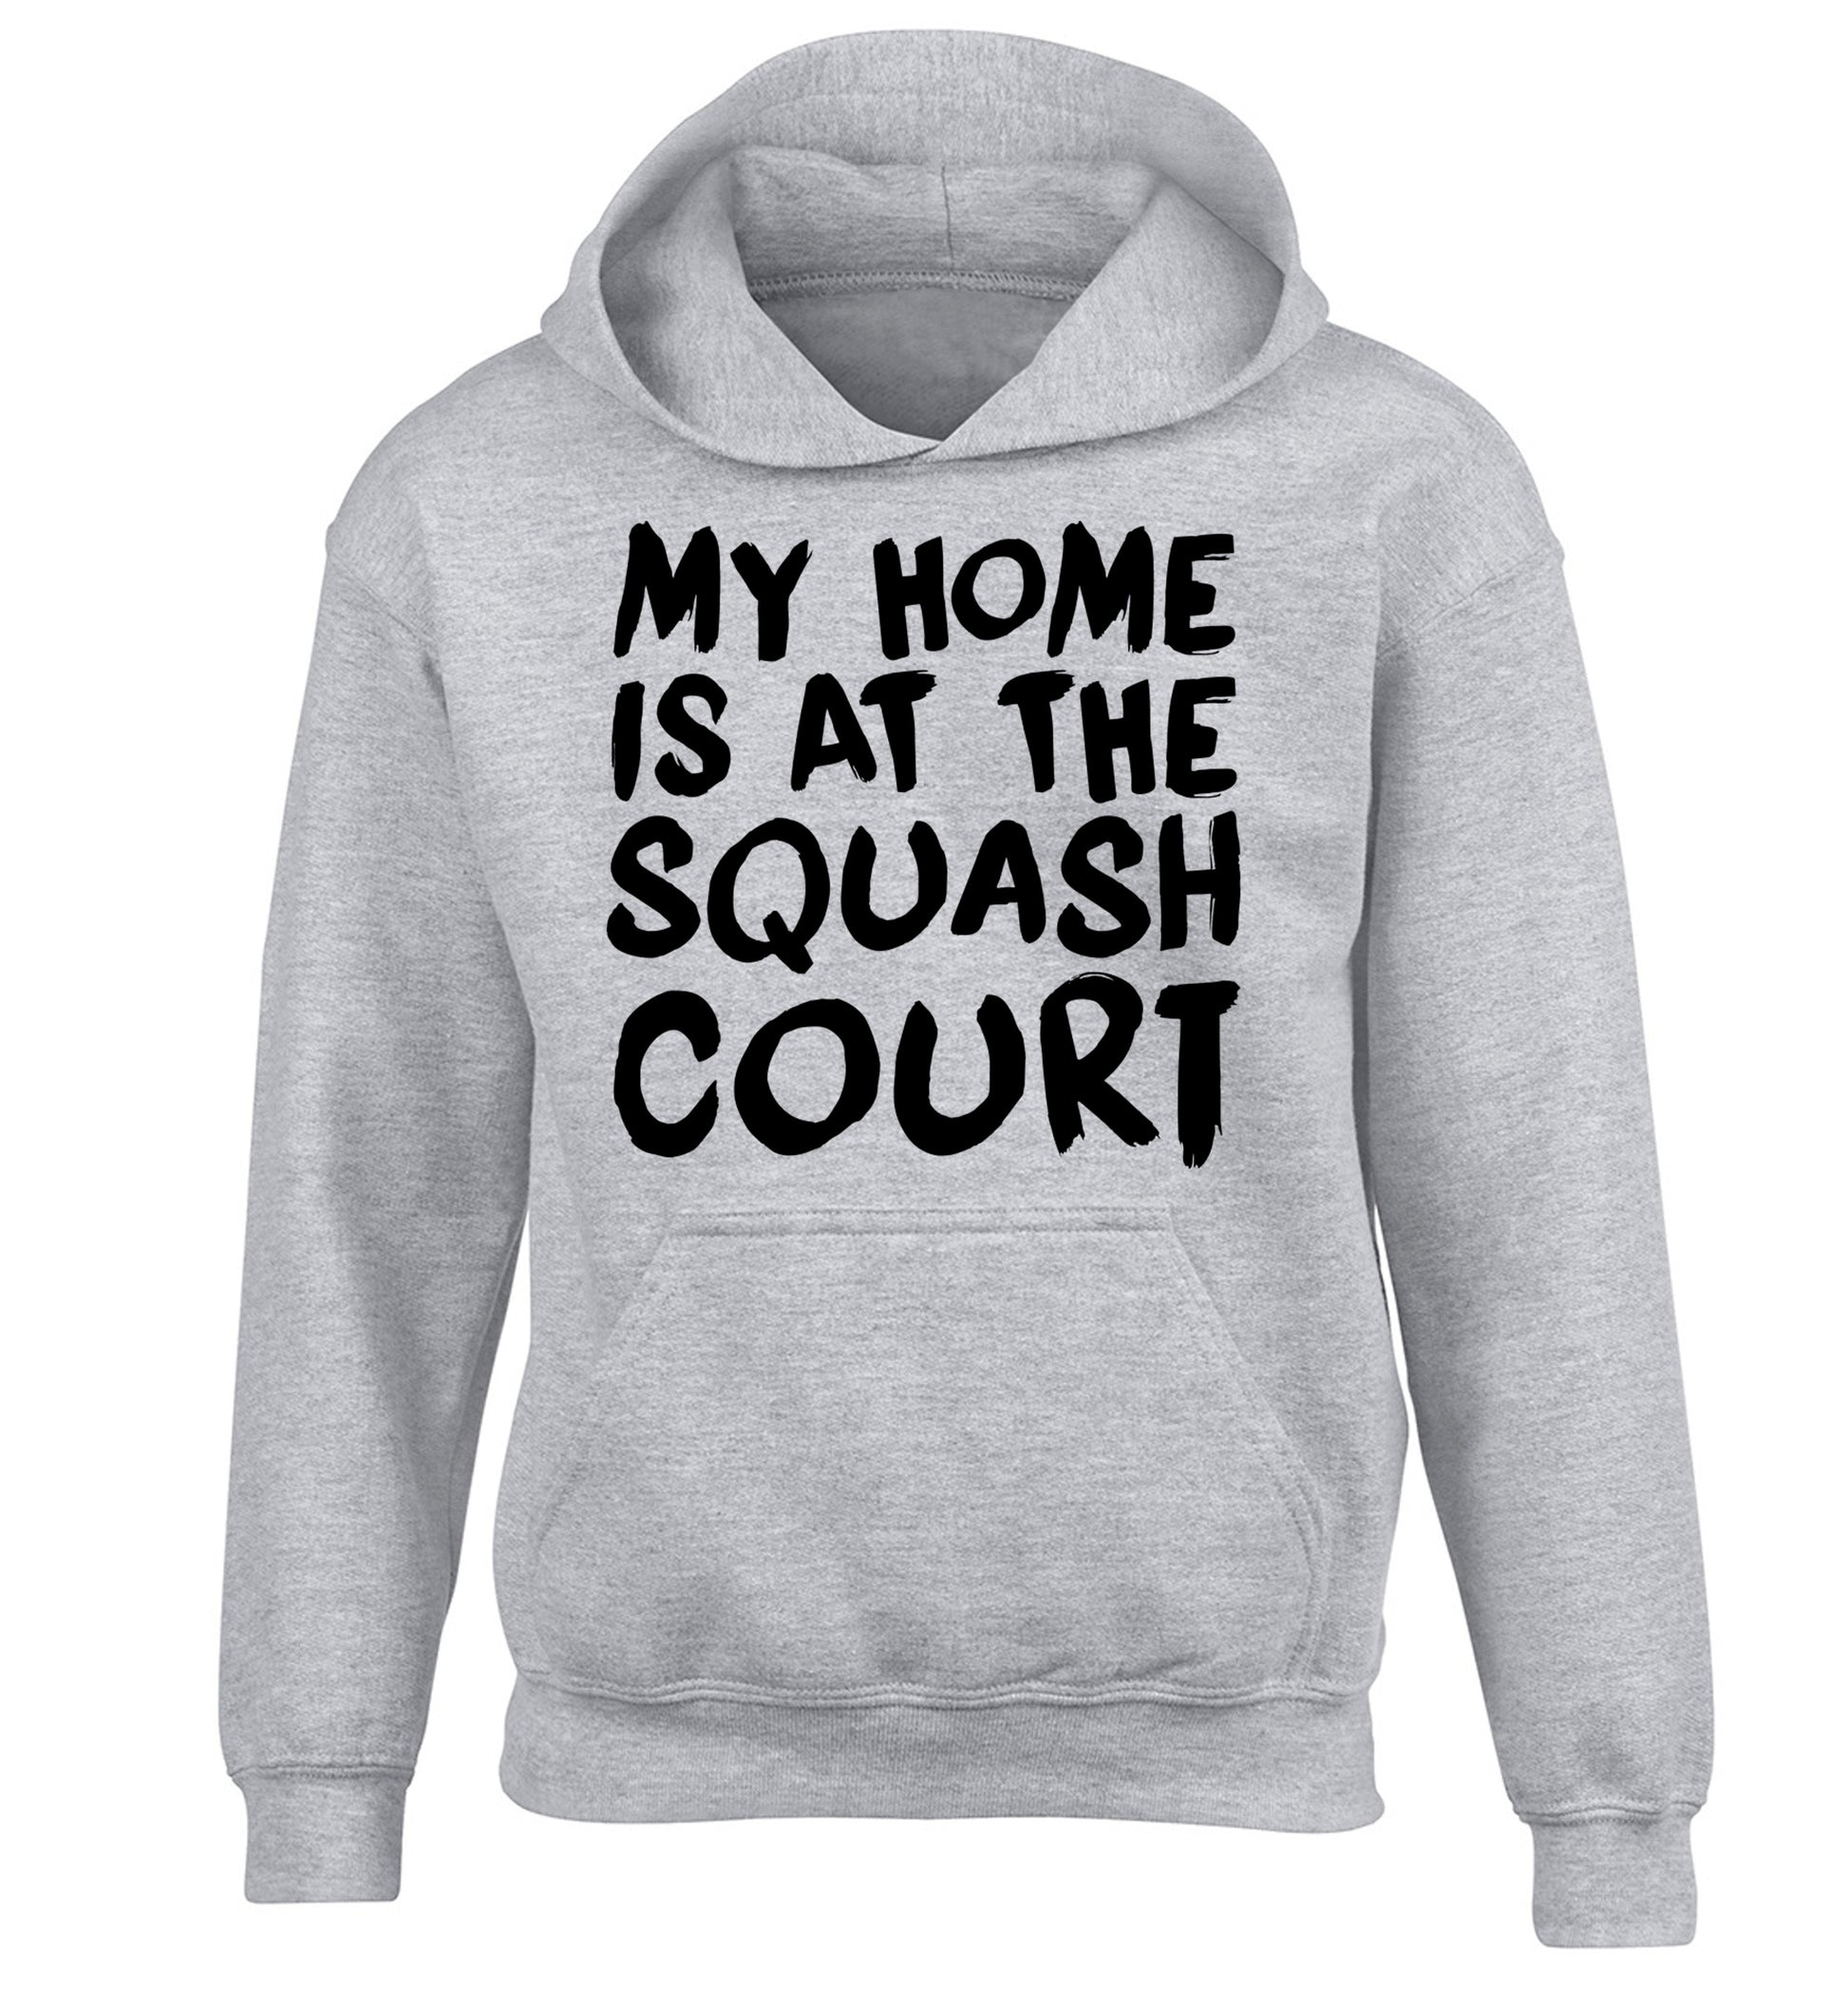 My home is at the squash court children's grey hoodie 12-14 Years